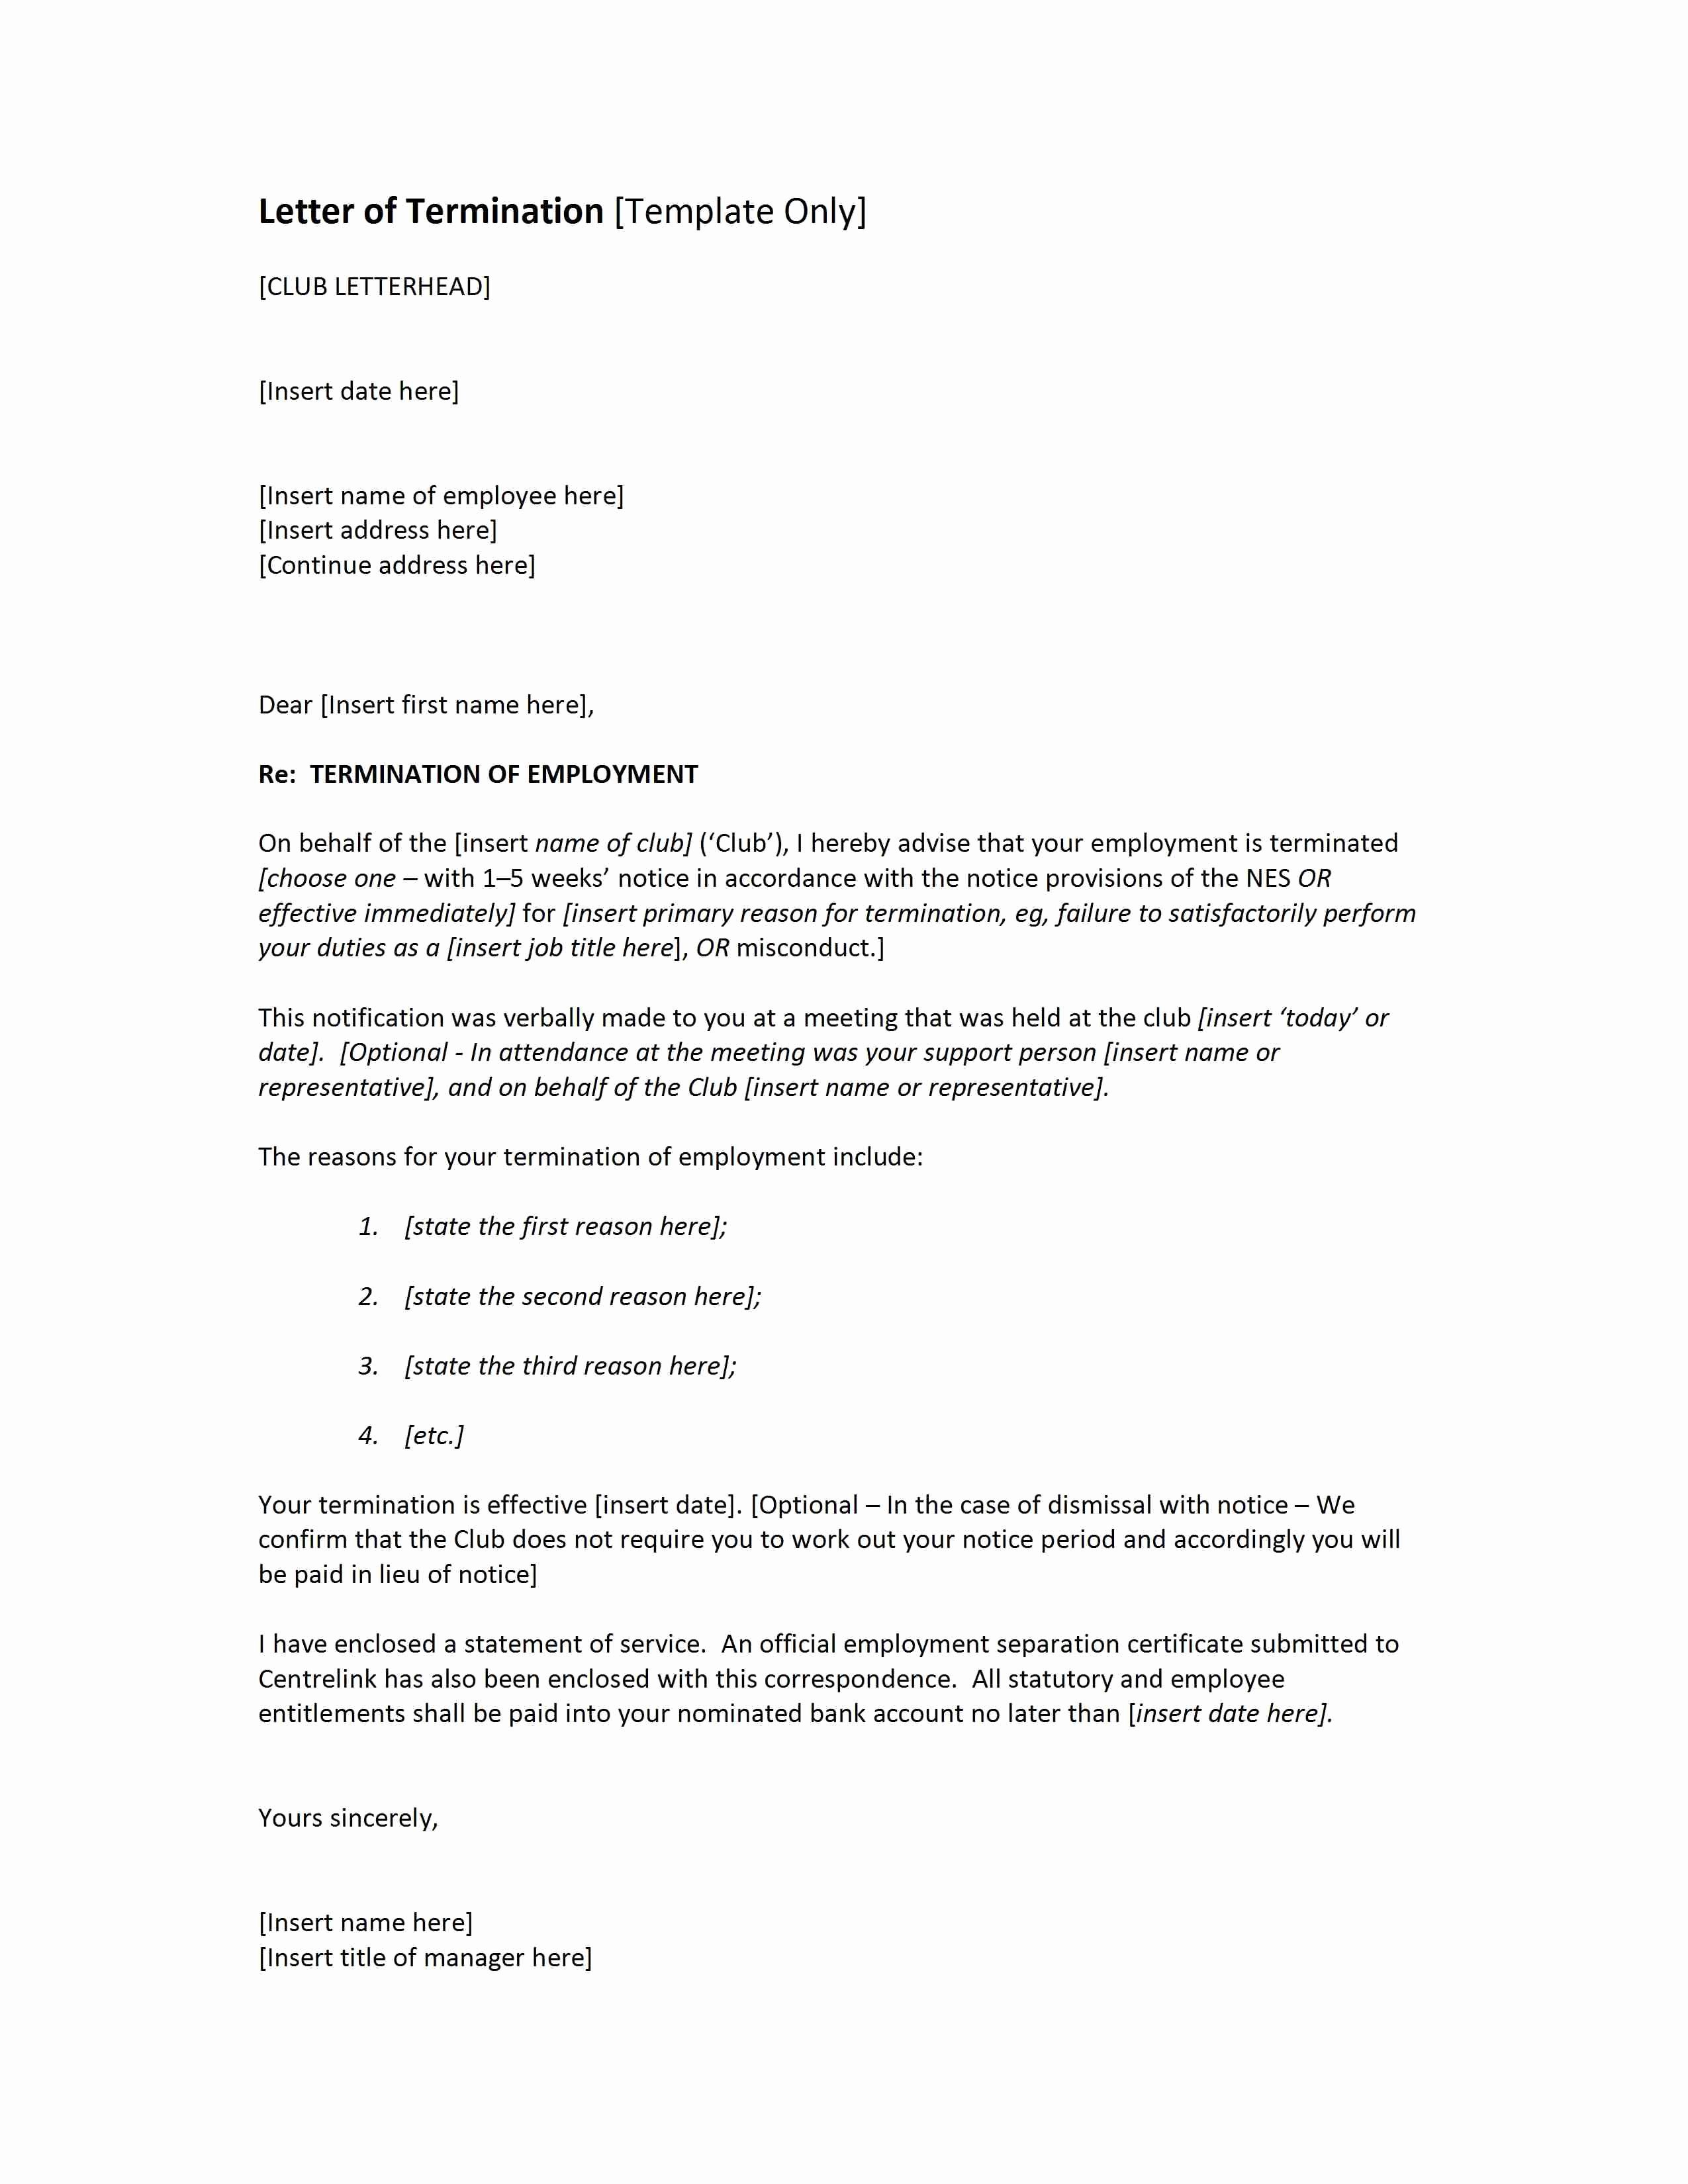 Letter Of Contract Termination Fresh Contract Termination Letter